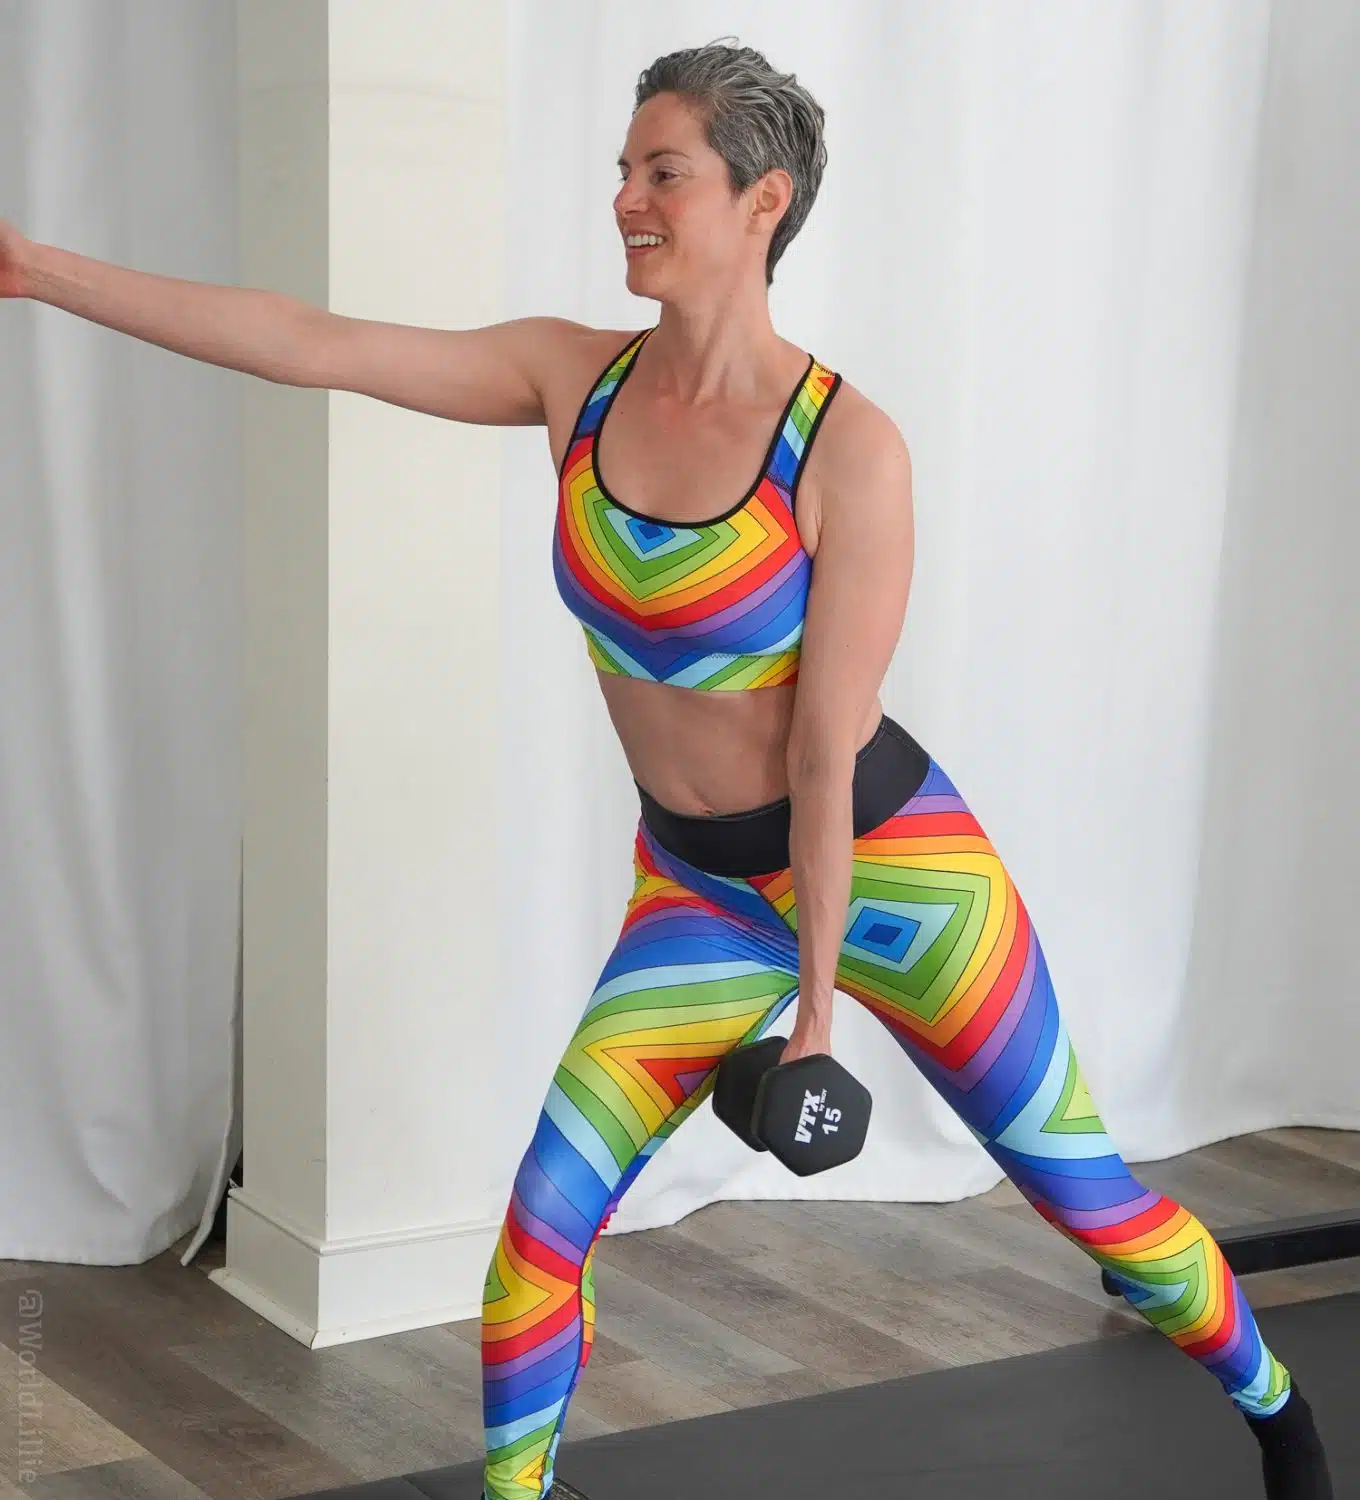 Moving into a side lunge exercise.